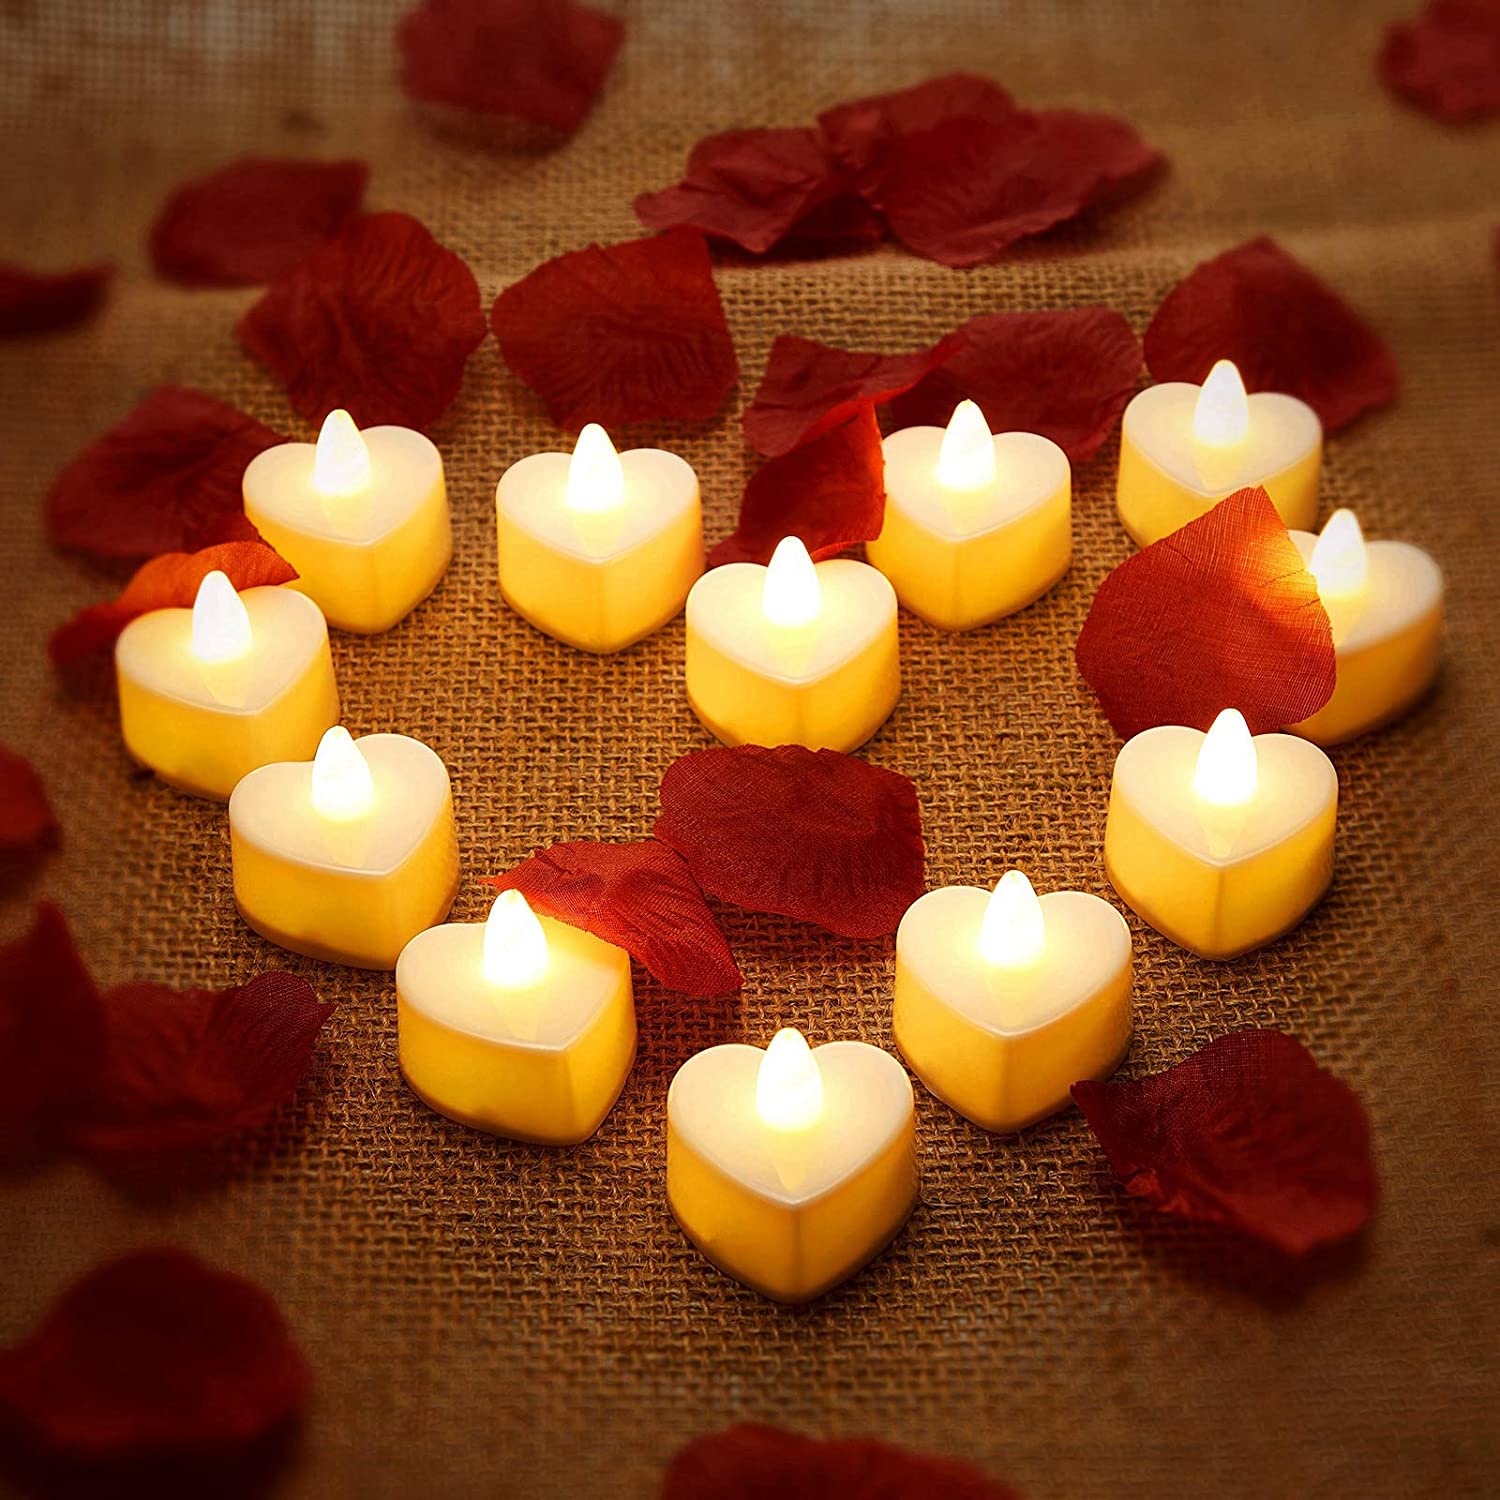 Heart Shape Led Tealight Candles Romantic Love Led Candles With Silk Rose Petals Girl Scatter Artificial Flower Petals Electric Candle Light Outdoor Home Decor Flameless Flickering Electric, Love Bird Candle Mini